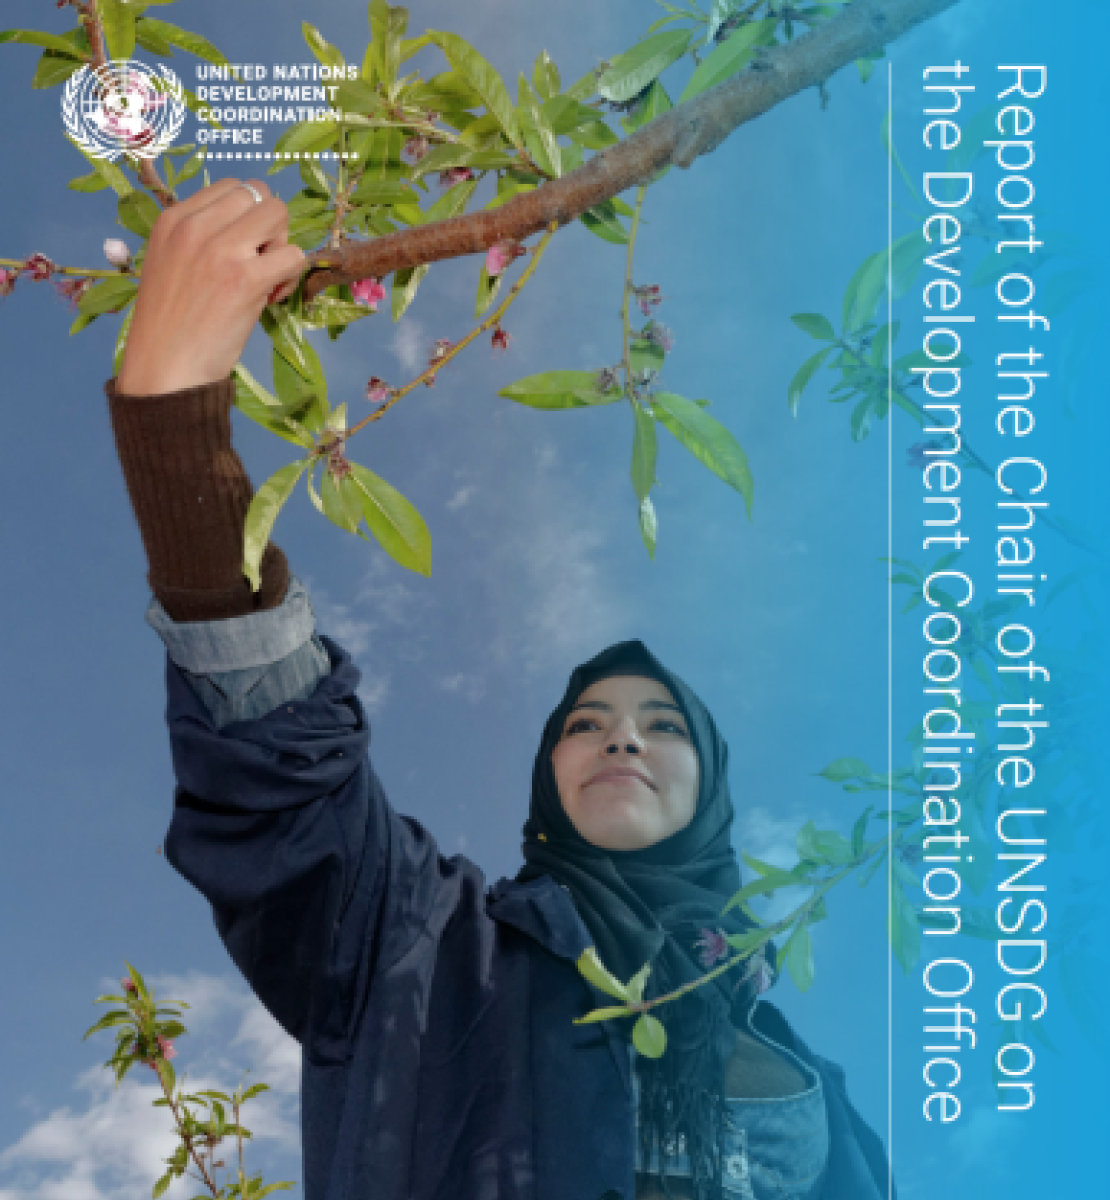 The cover shows a young woman from a low camera angle looking up at her as she pulls a branch with the title of the report on the right displayed vertically.